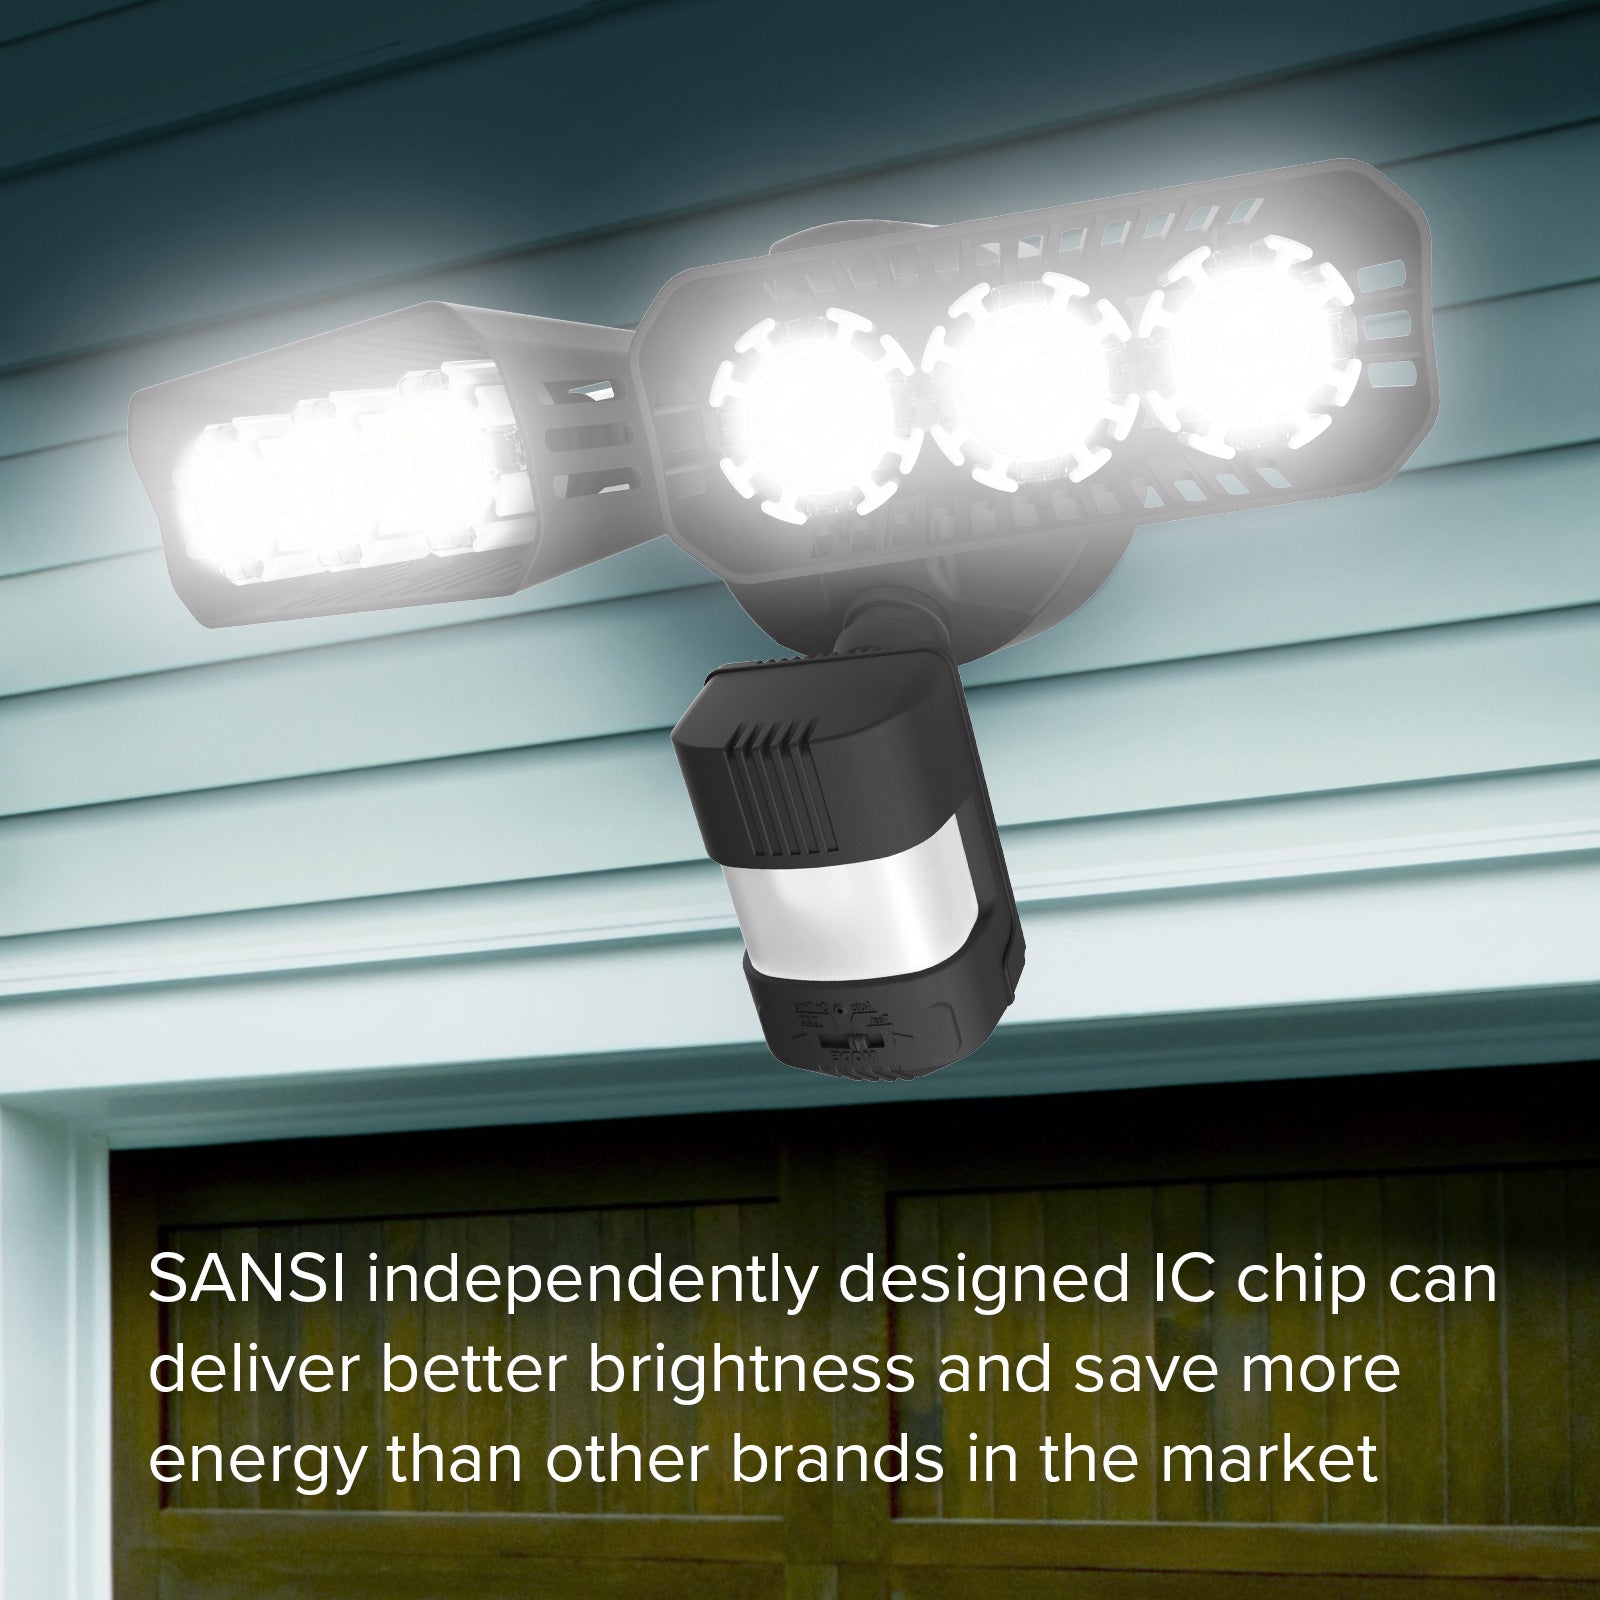 27W LED Security Light (Dusk to Dawn & Motion Sensor) with SANSI independently designed IC chip can deliver better brightness and save more energy than other brands in the market